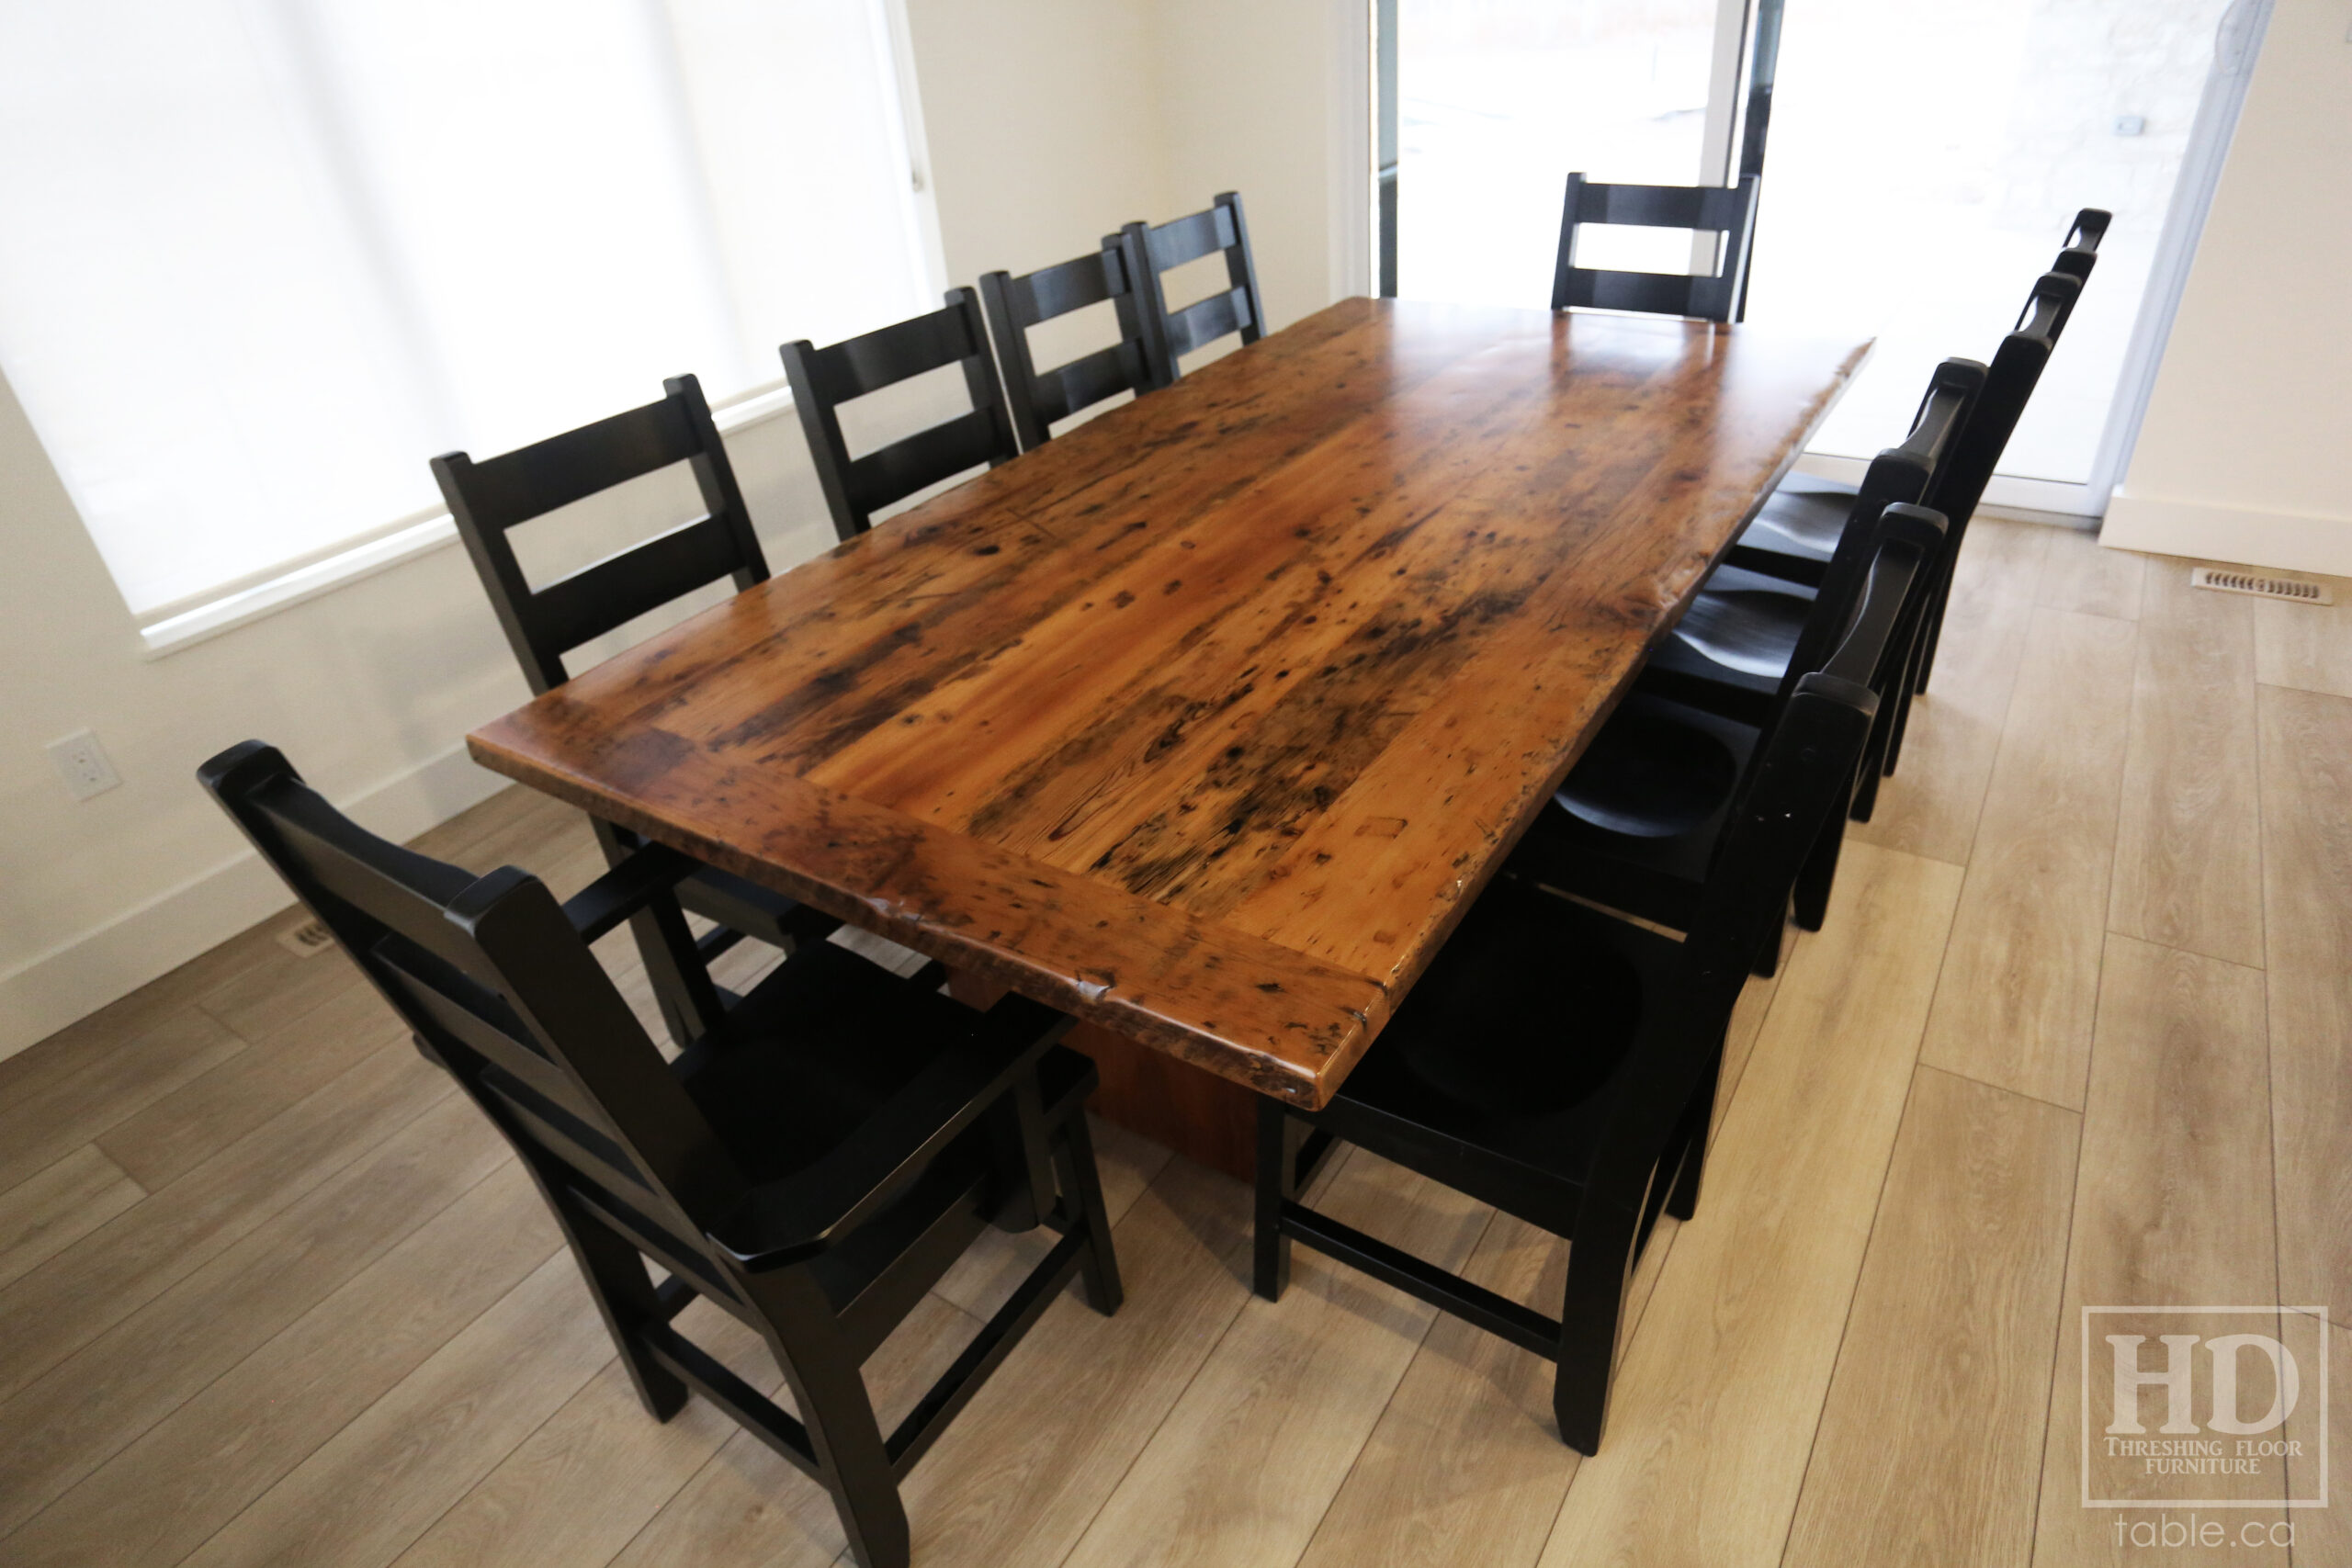 8' Reclaimed Ontario Barnwood Table we made for a Tilsonburg home - 48" wide - Plank Base Option - Old Growth Hemlock Threshing Floor Construction - Original edges & distressing maintained - Premium epoxy + satin polyurethane finish - Greytone Option - Solid Black Painted Wormy Maple Ladder Back Chairs - www.table.ca